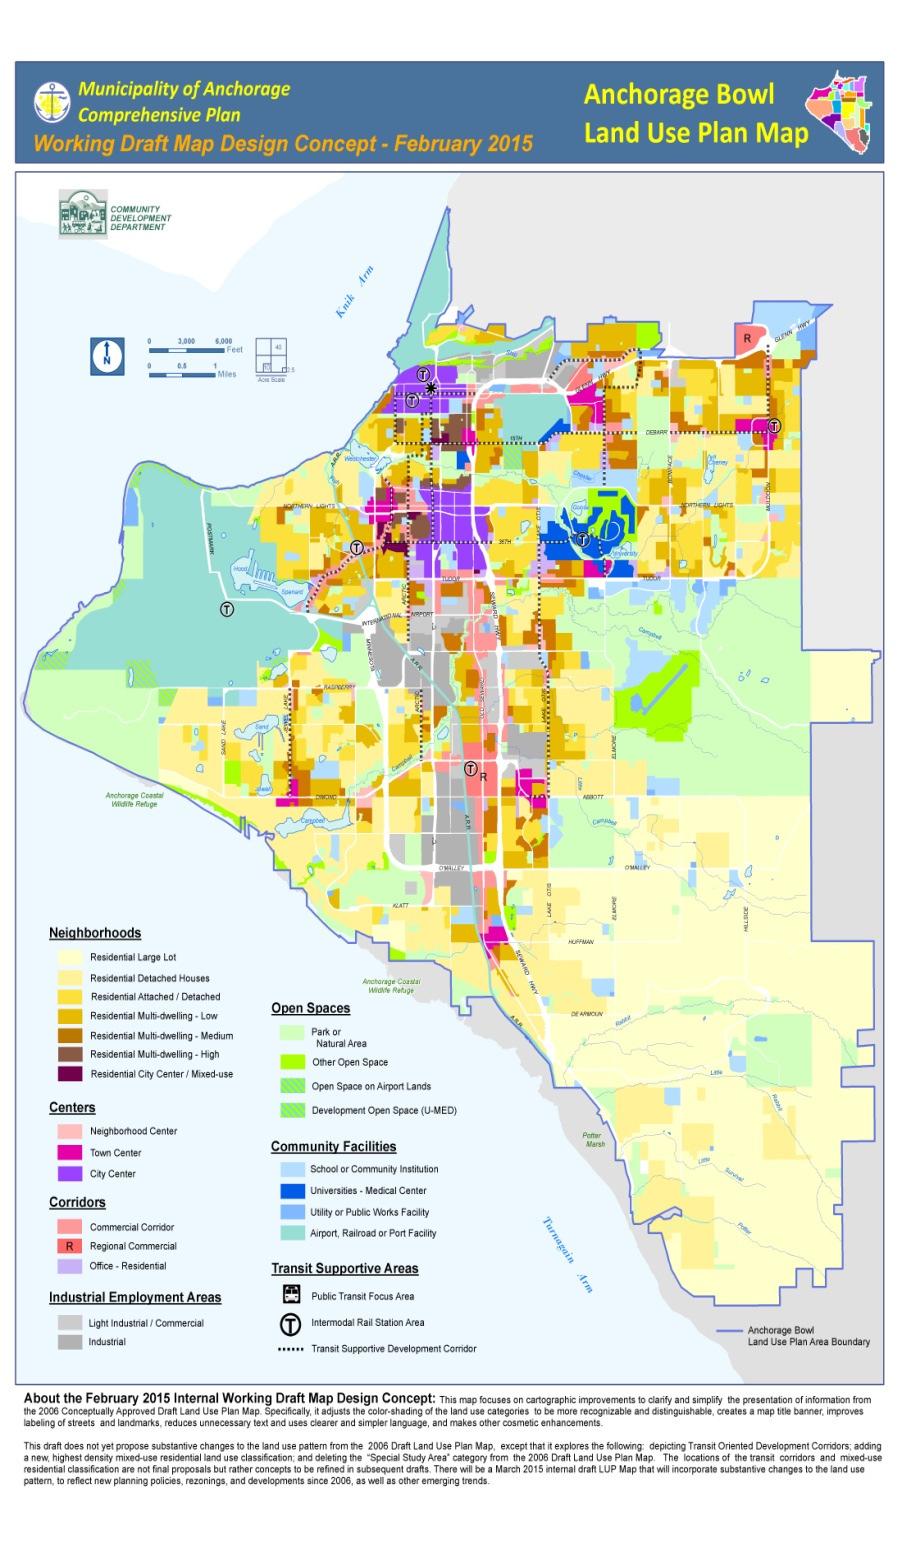 Changes in land use and zoning New Title 21 zoning districts New policies/neighborhood plans Forecast land needs Emergent